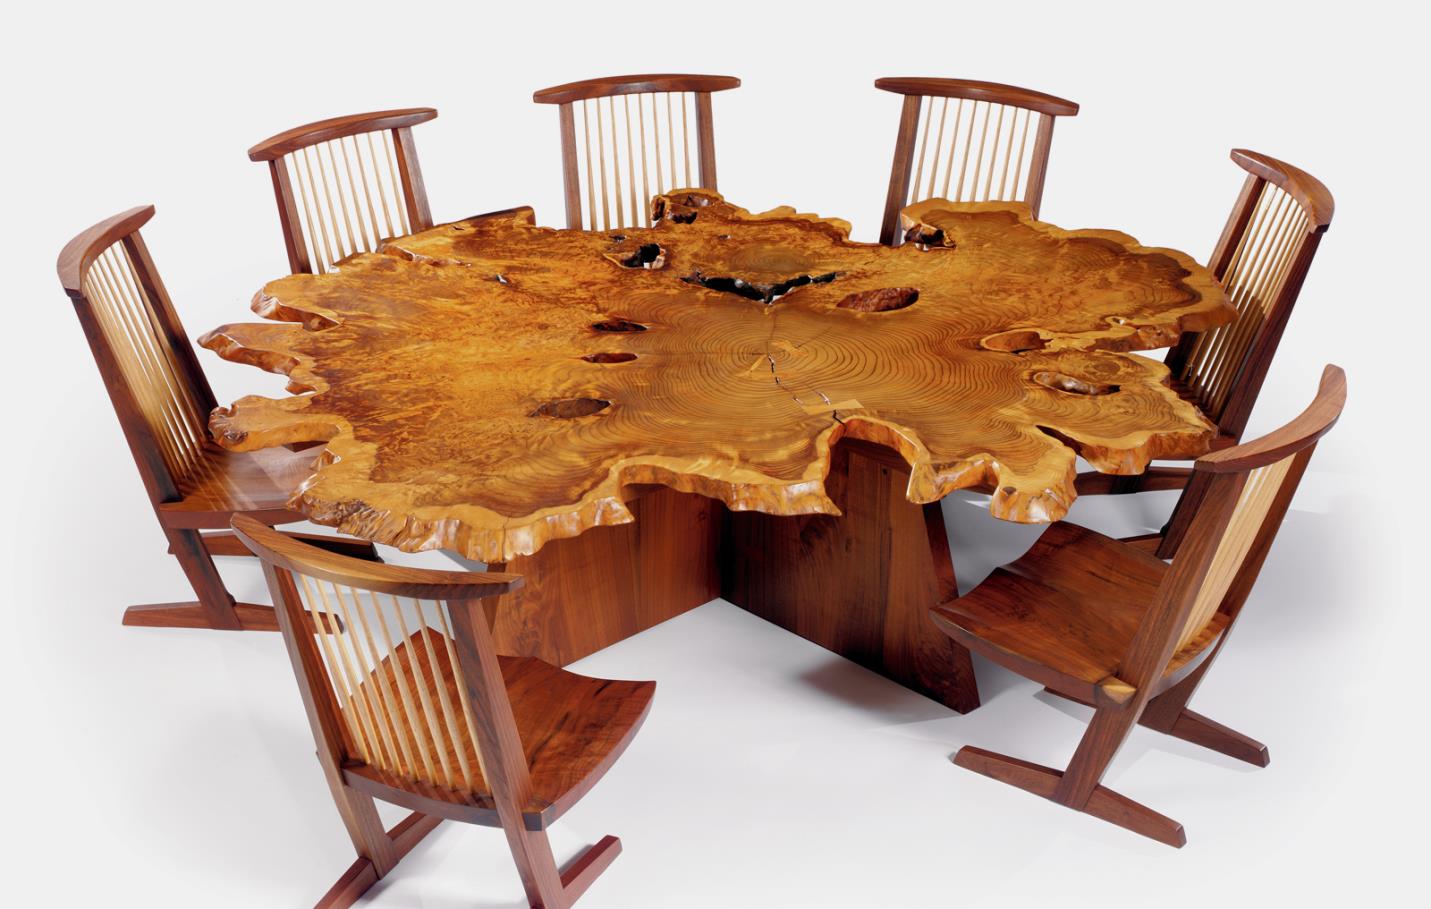 George Nakashima's “Arlyn” table - redwood, black walnut, madrone burl, and east indian laurel; 26” x 89” x 91”. Conoid chairs - walnut and hickory; 35 ½” x 20” x 21”.